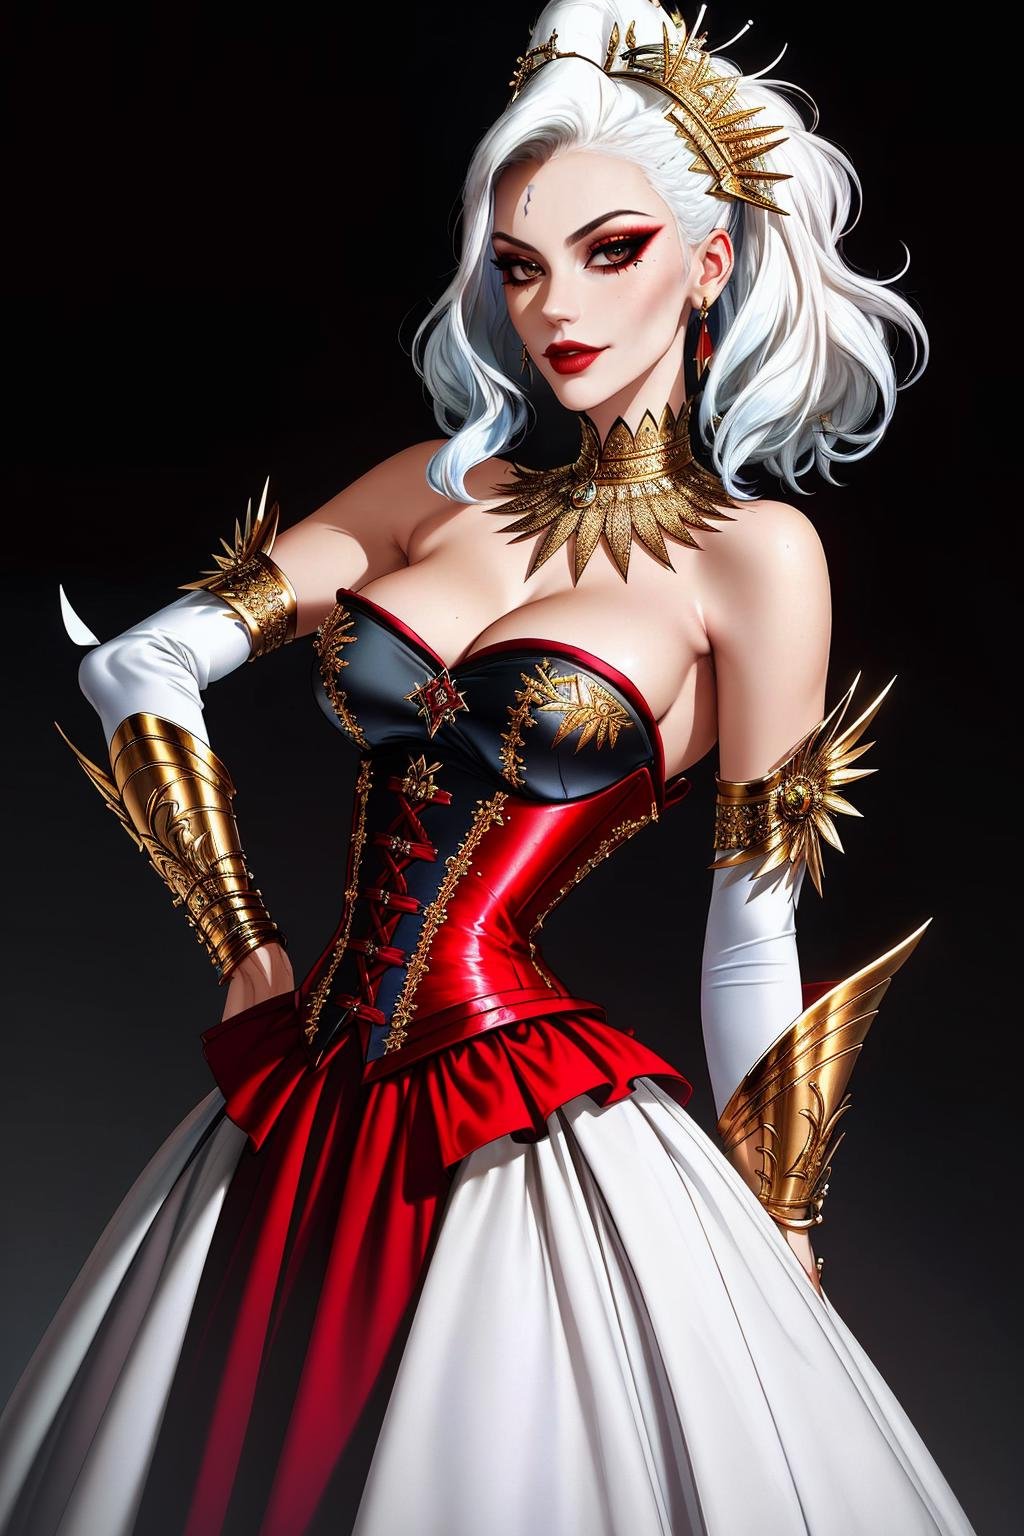 ((Masterpiece, best quality,edgQuality)),smirk,smug,white hair,Haute_Couture, red corset,golden embroidery, woman wearing a Haute_Couture corset,(((edgTM, wearing edgTM_style fashion, eccentric clothing))),feathers, <lora:edgLycorisMugler-light:1>